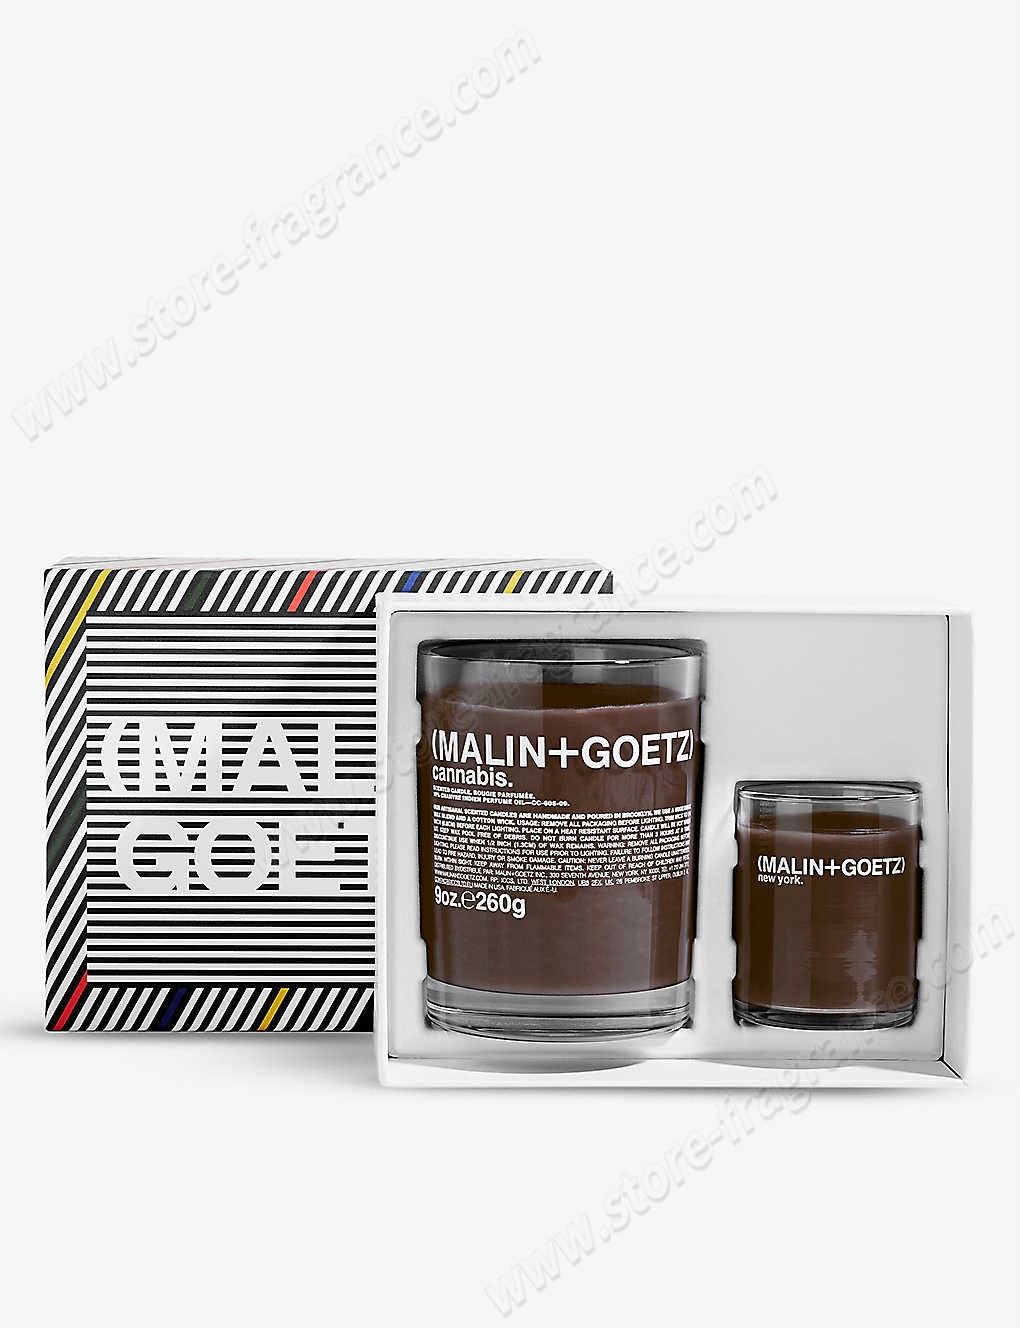 MALIN + GOETZ/Get Lit cannabis candle and votive gift set Limit Offer - MALIN + GOETZ/Get Lit cannabis candle and votive gift set Limit Offer